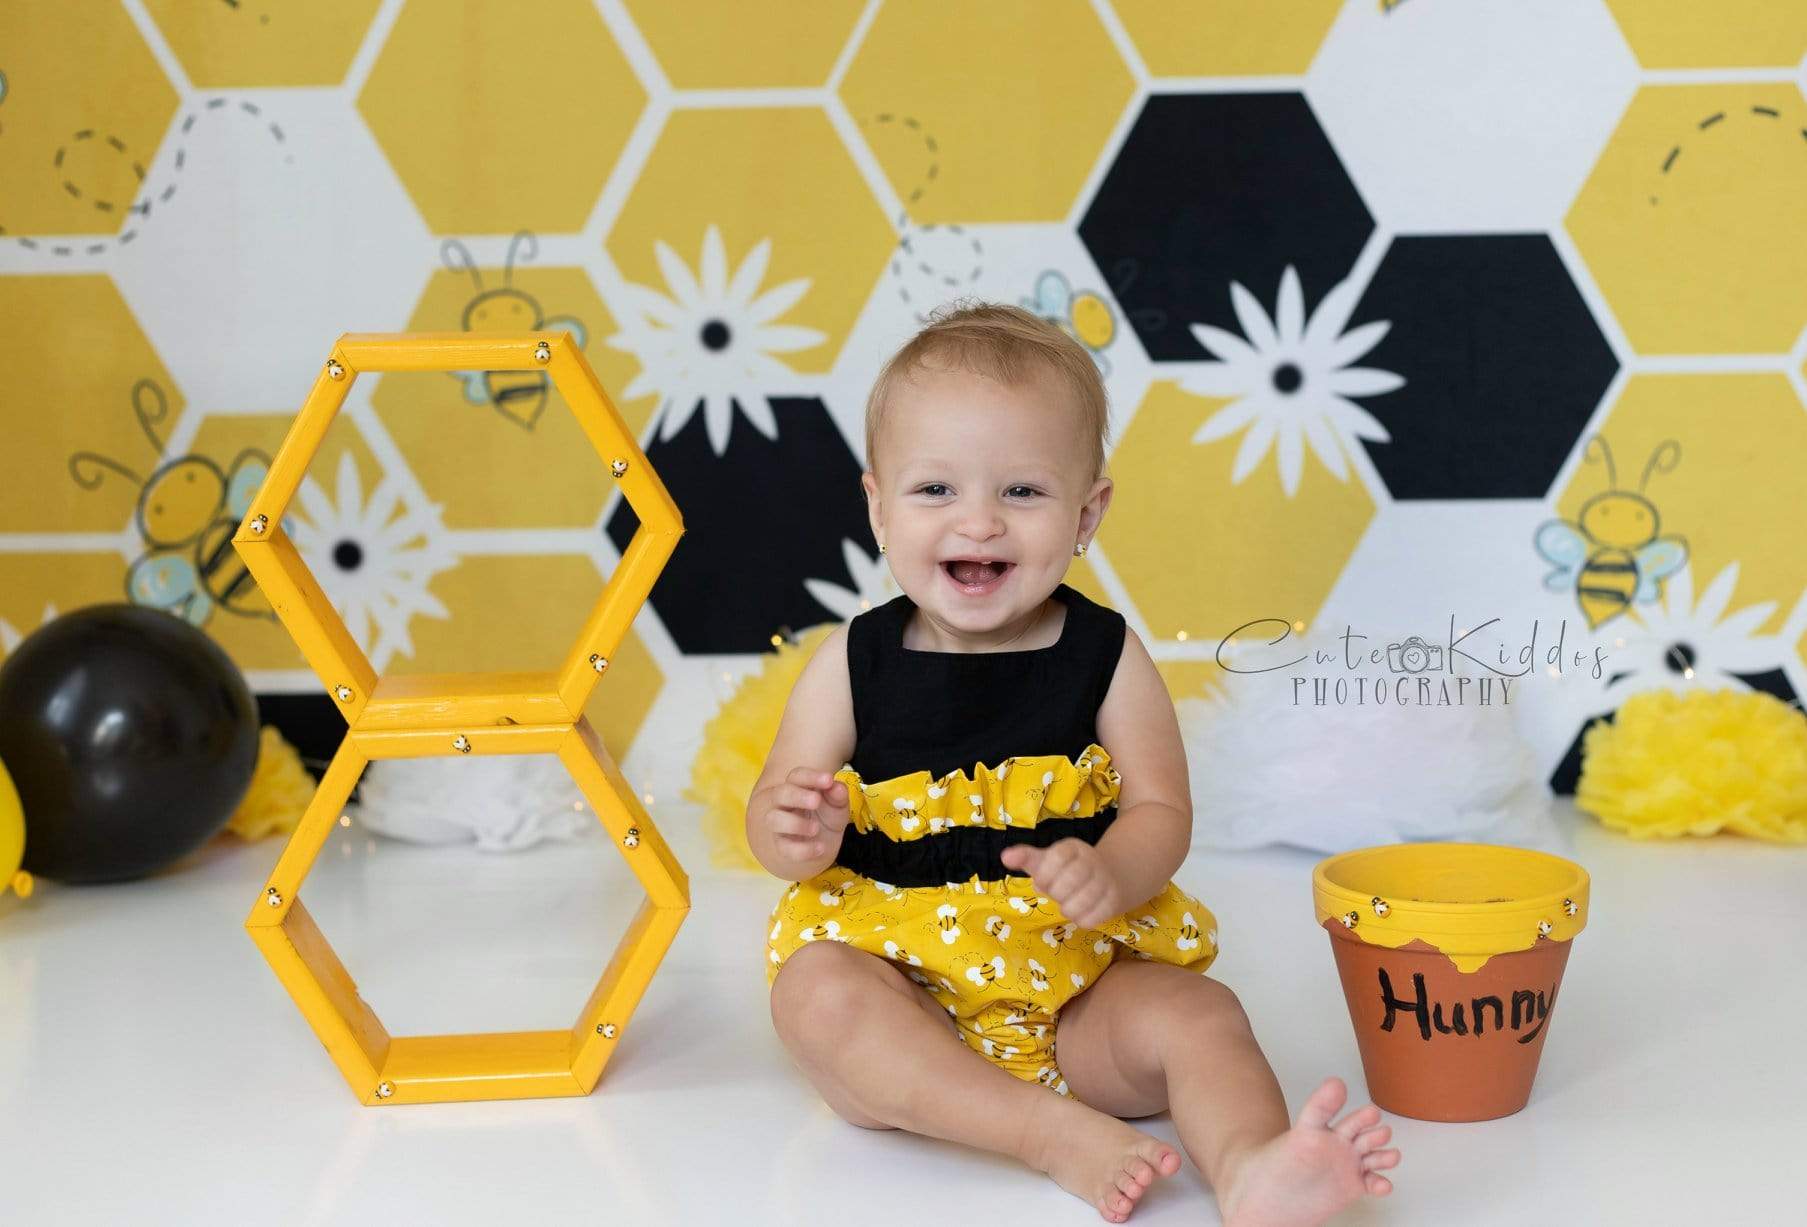 Katebackdrop：Kate Bumble Bee Summer Backdrop for Photography Designed by Megan Leigh Photography